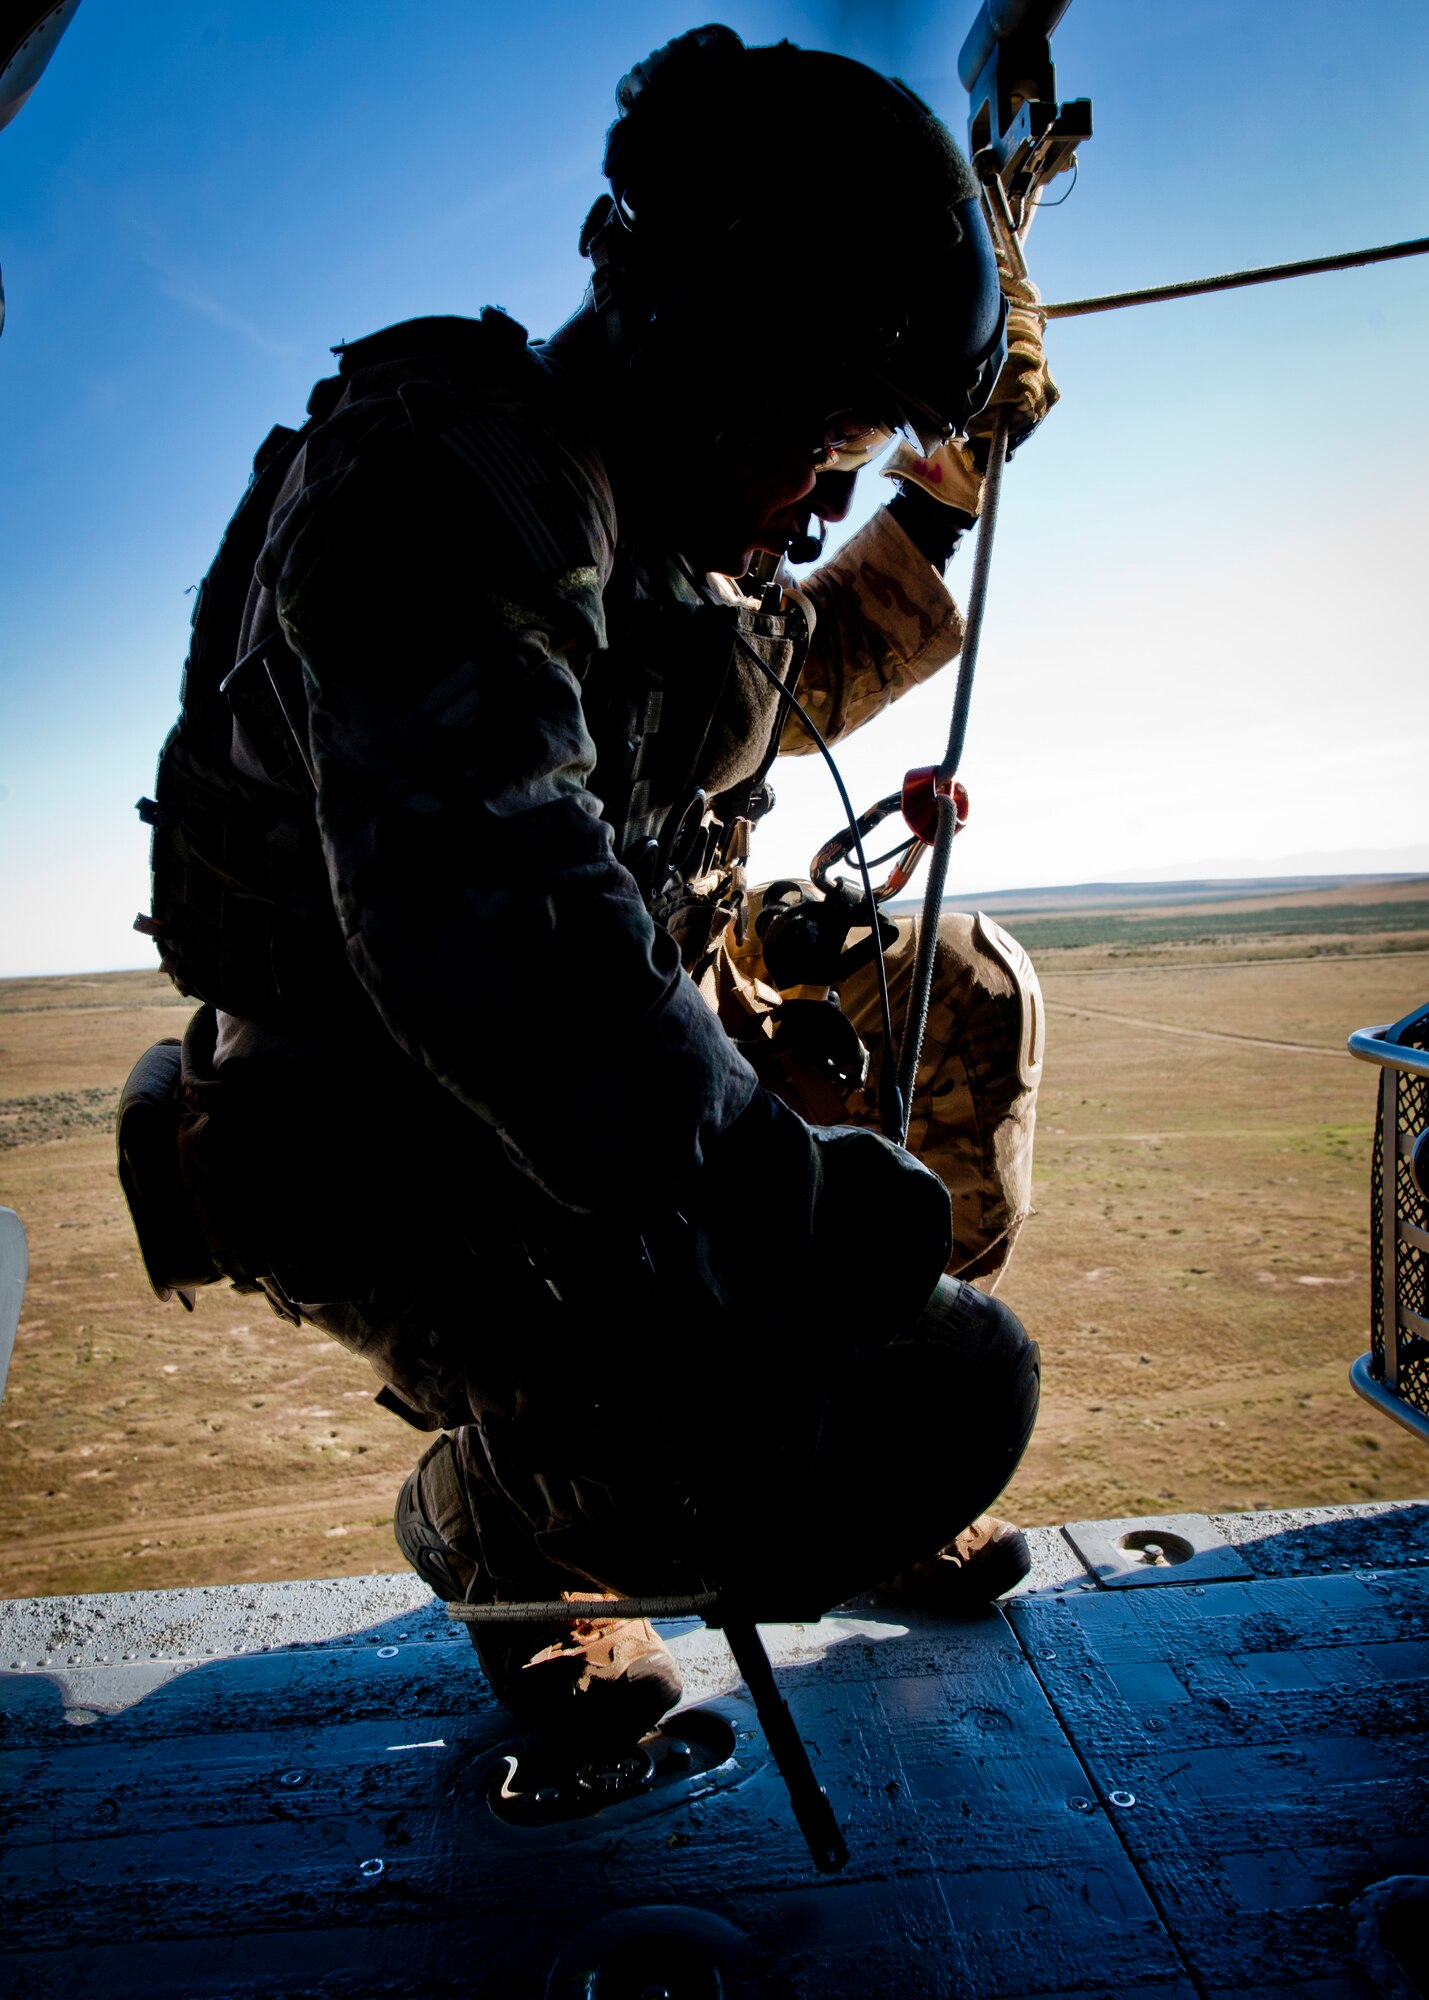 A U.S. Air Force pararescueman prepares to rappel out of an HH-60 Pave Hawk during the U.S. Air Force Weapons School terminal employment phase, April 29, 2014, at Orchard Combat Training Range, Idaho.  The pararescuemen supported the U.S. Air Force Weapons School, 34th Weapons Squadron in training scenarios during the TE phase.  (U.S. Air Force photo by Senior Airman Jason Couillard)